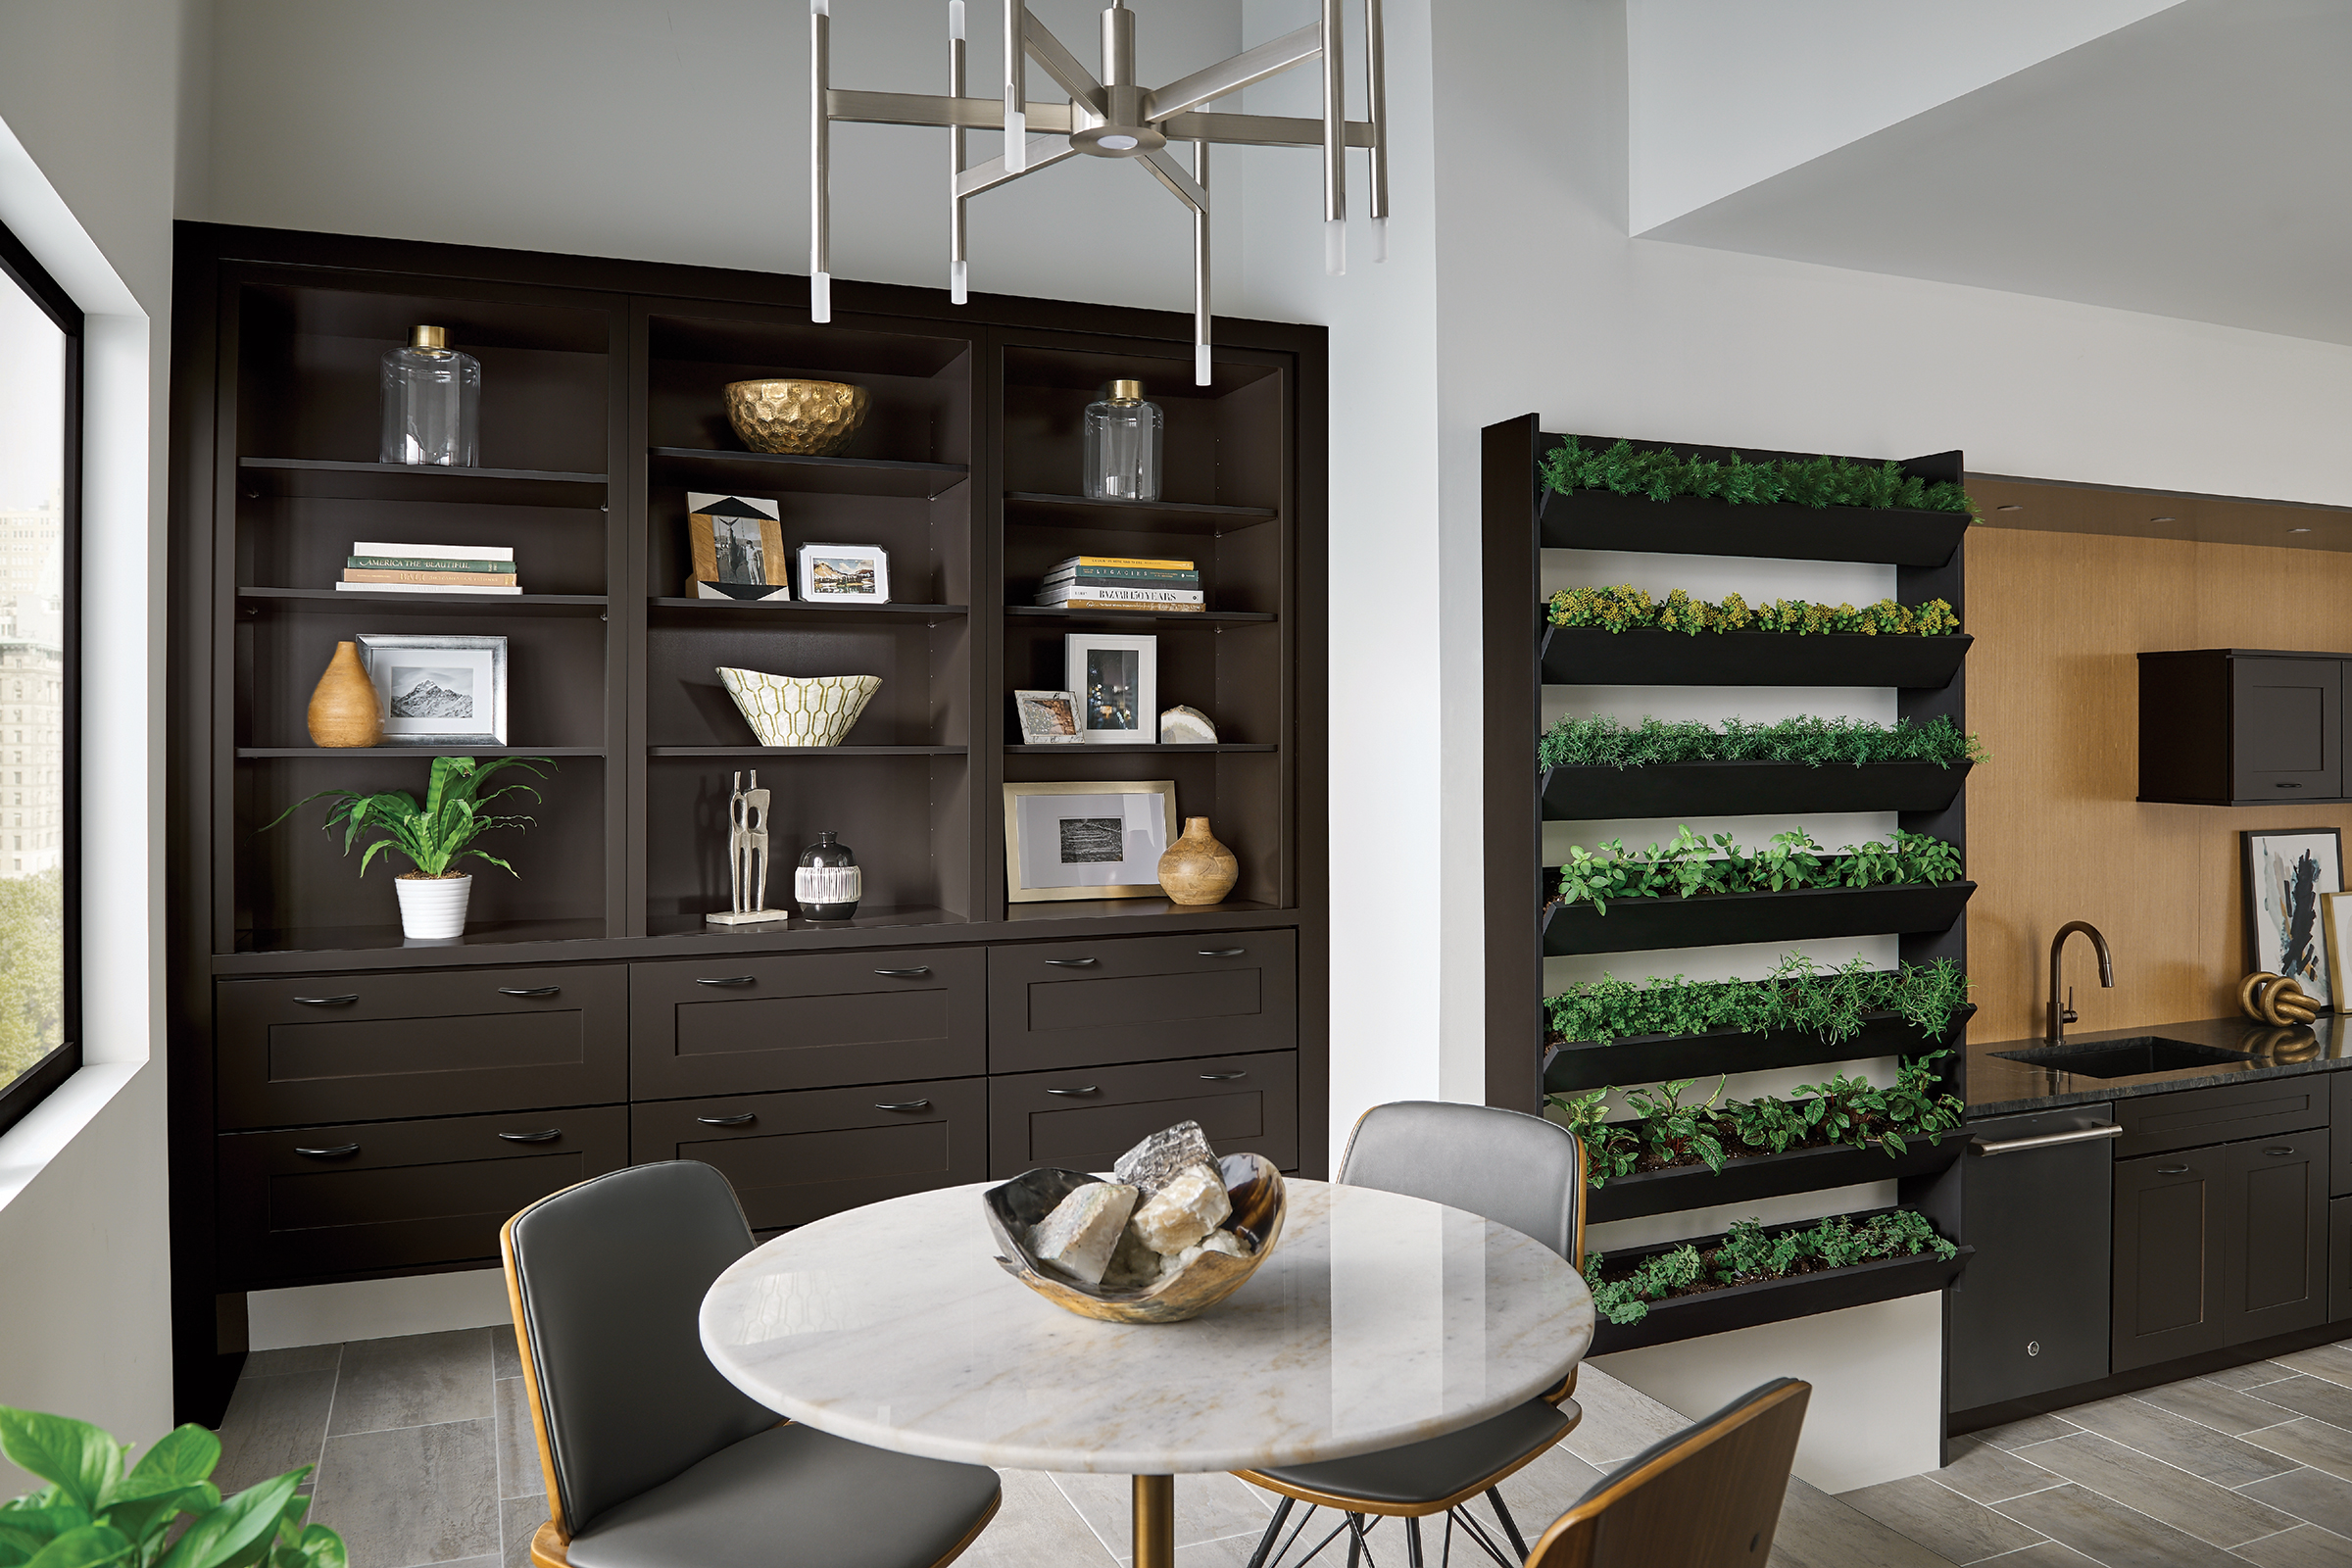 KraftMaid Modern Open Kitchen Concept with Wooden Shelving